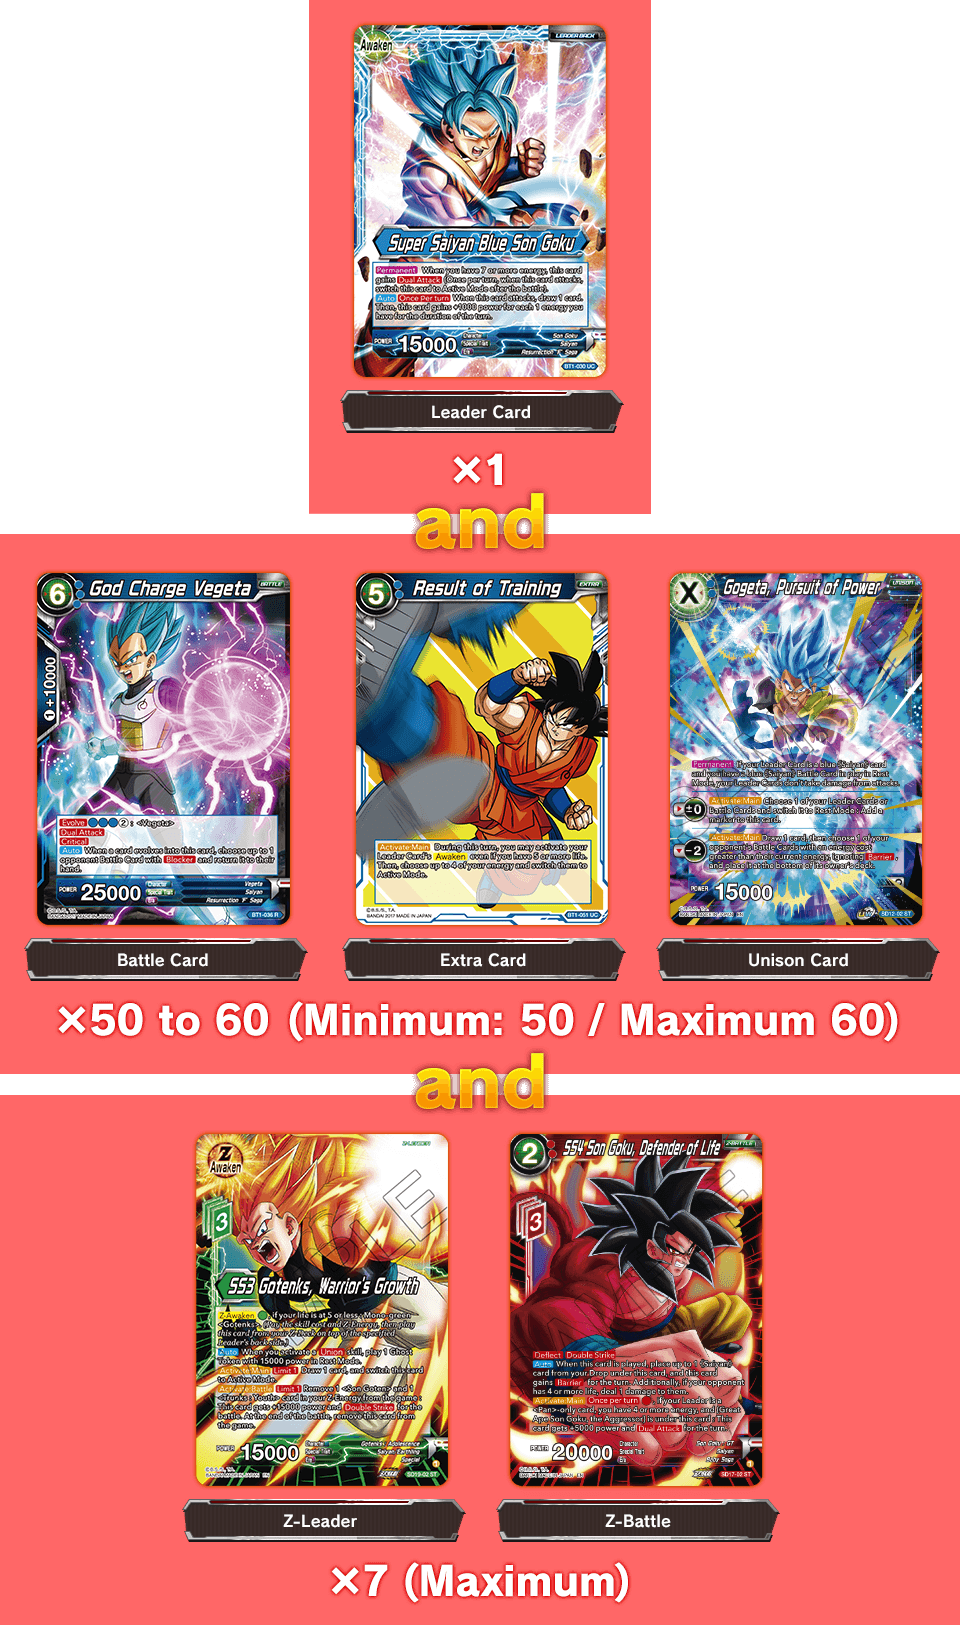 Details about   Dragon Ball Super Card Game Lot of 100 Cards Fast Ship! See Description 